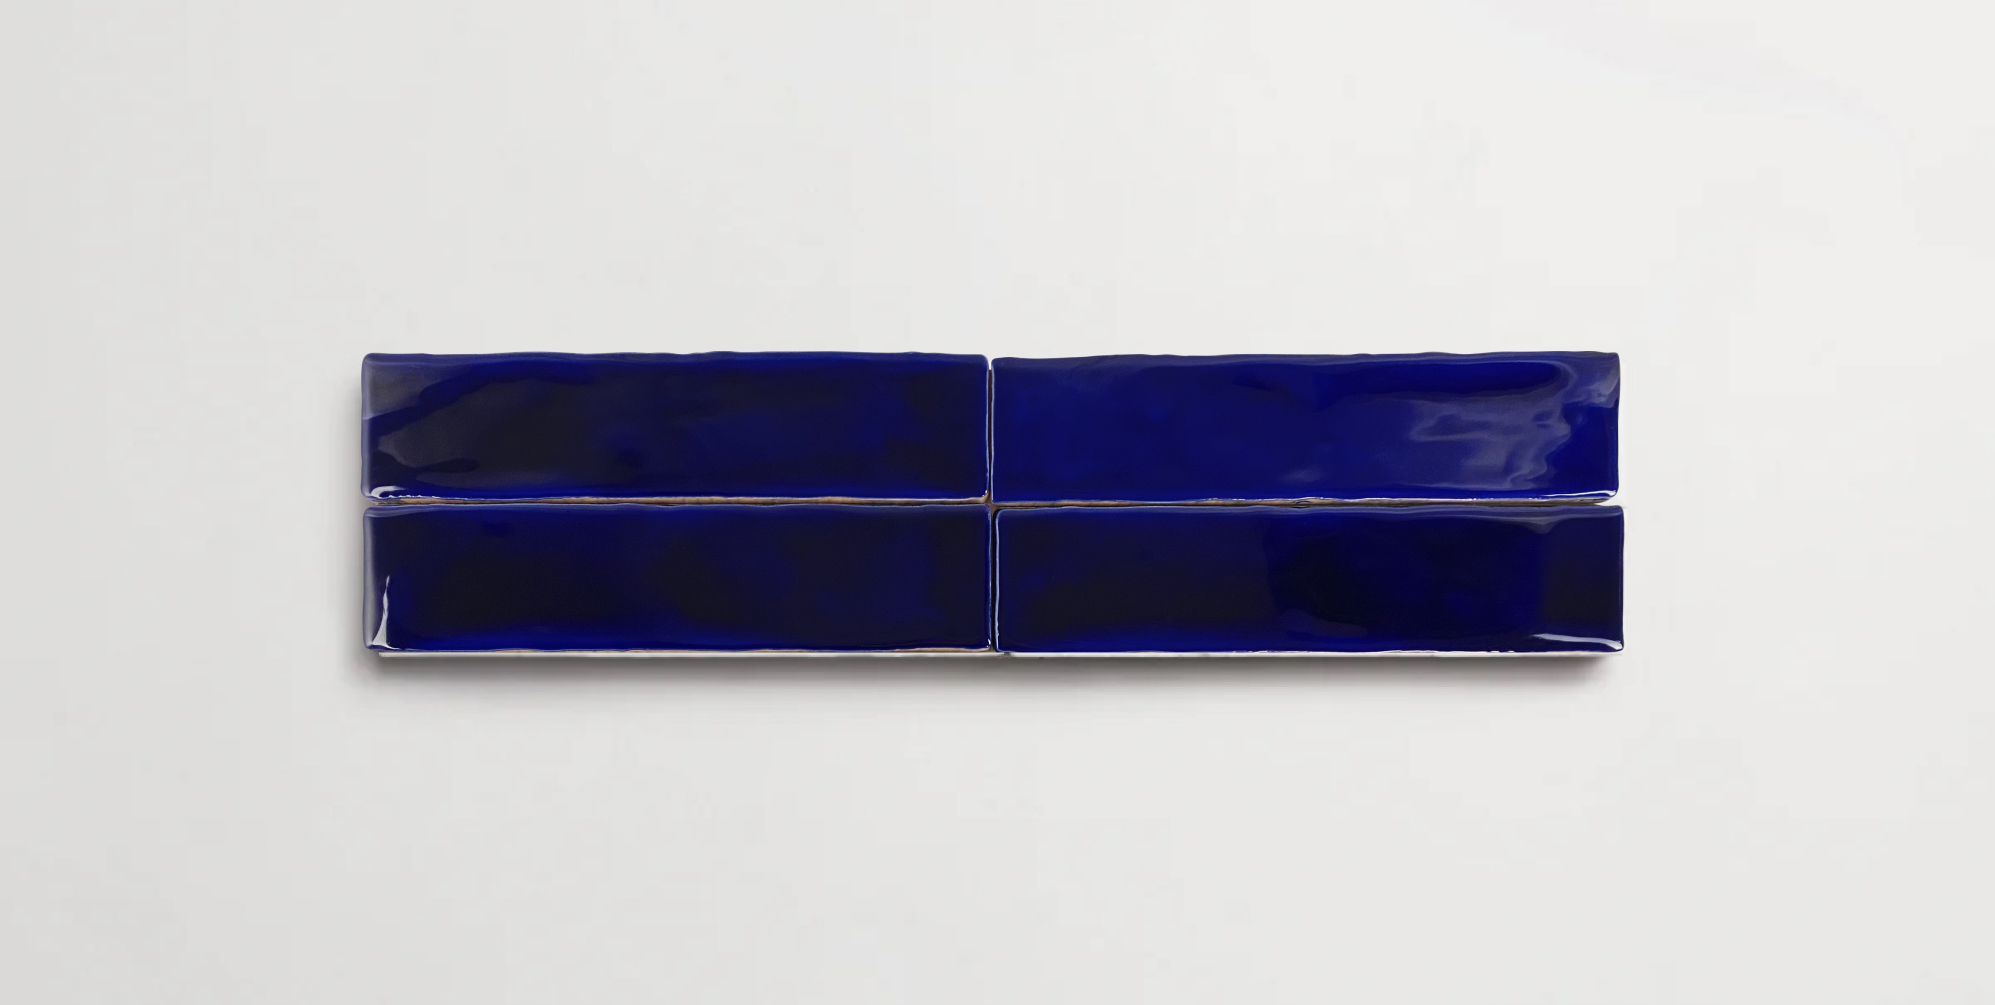 Four stacked 2" x 10" deep blue ceramic tiles in a glossy finish